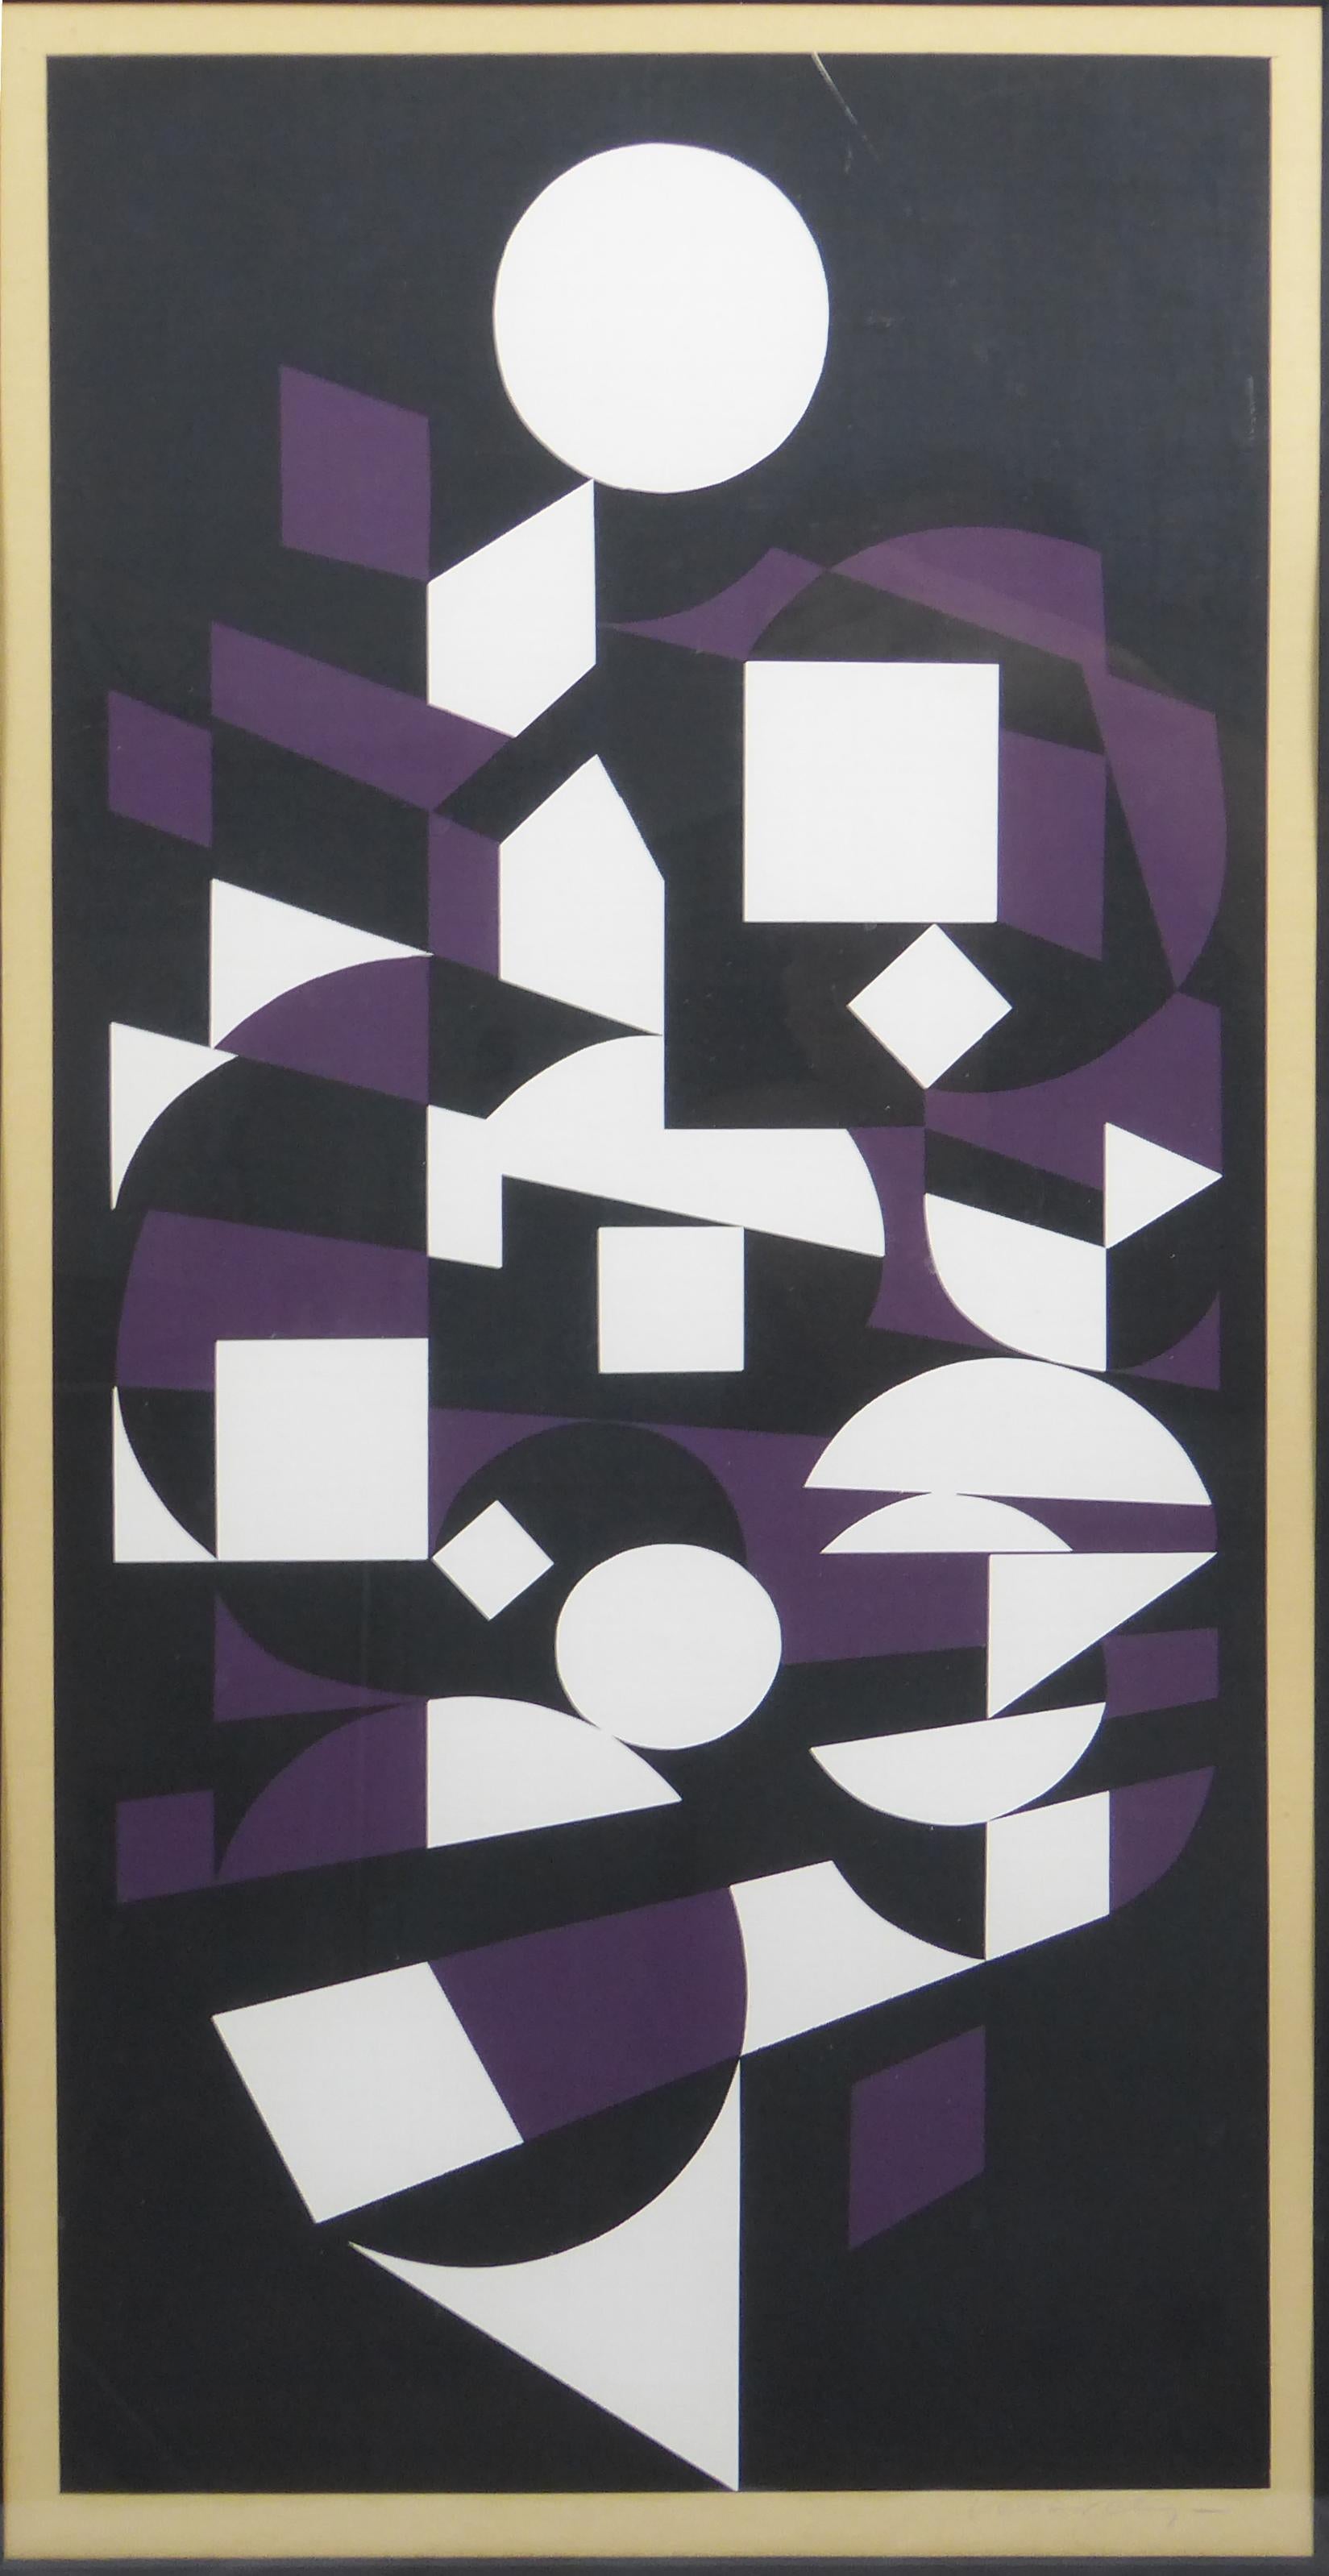 Handsome 1970s Victor Vasarely black, white and purple Cubist lithograph. Signed on the back. Vasarely was a prolific Hungarian/French Op Artist.